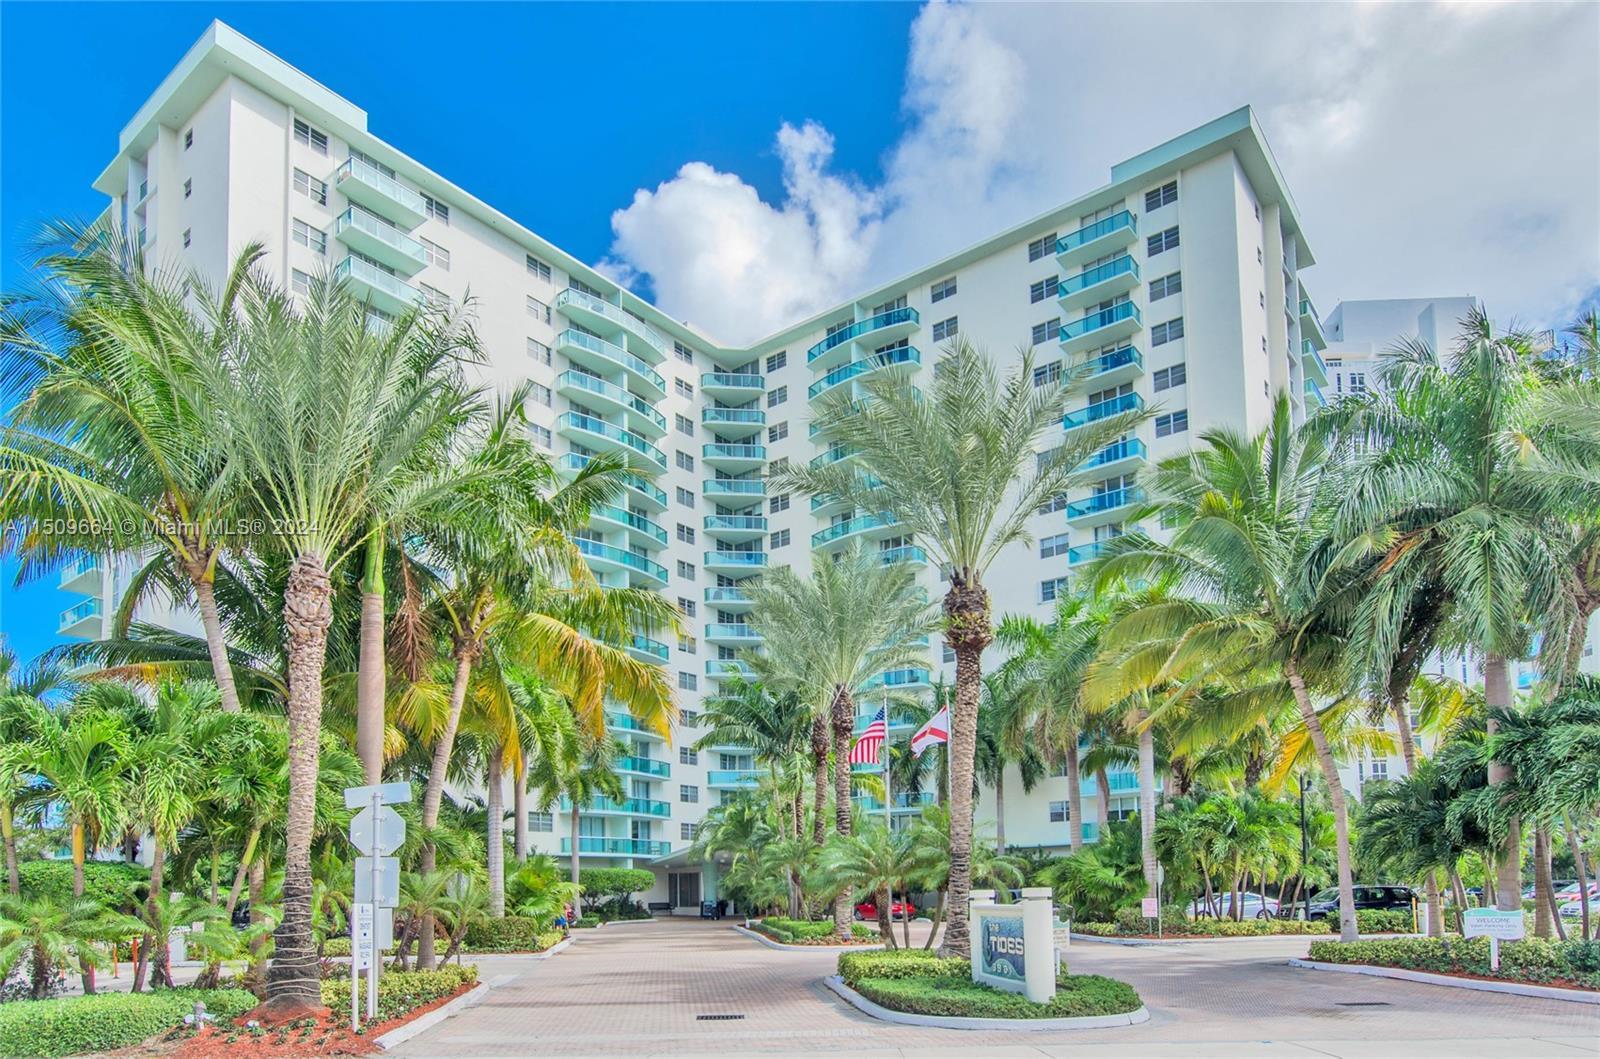 Photo of 3901 S Ocean Dr #1D in Hollywood, FL